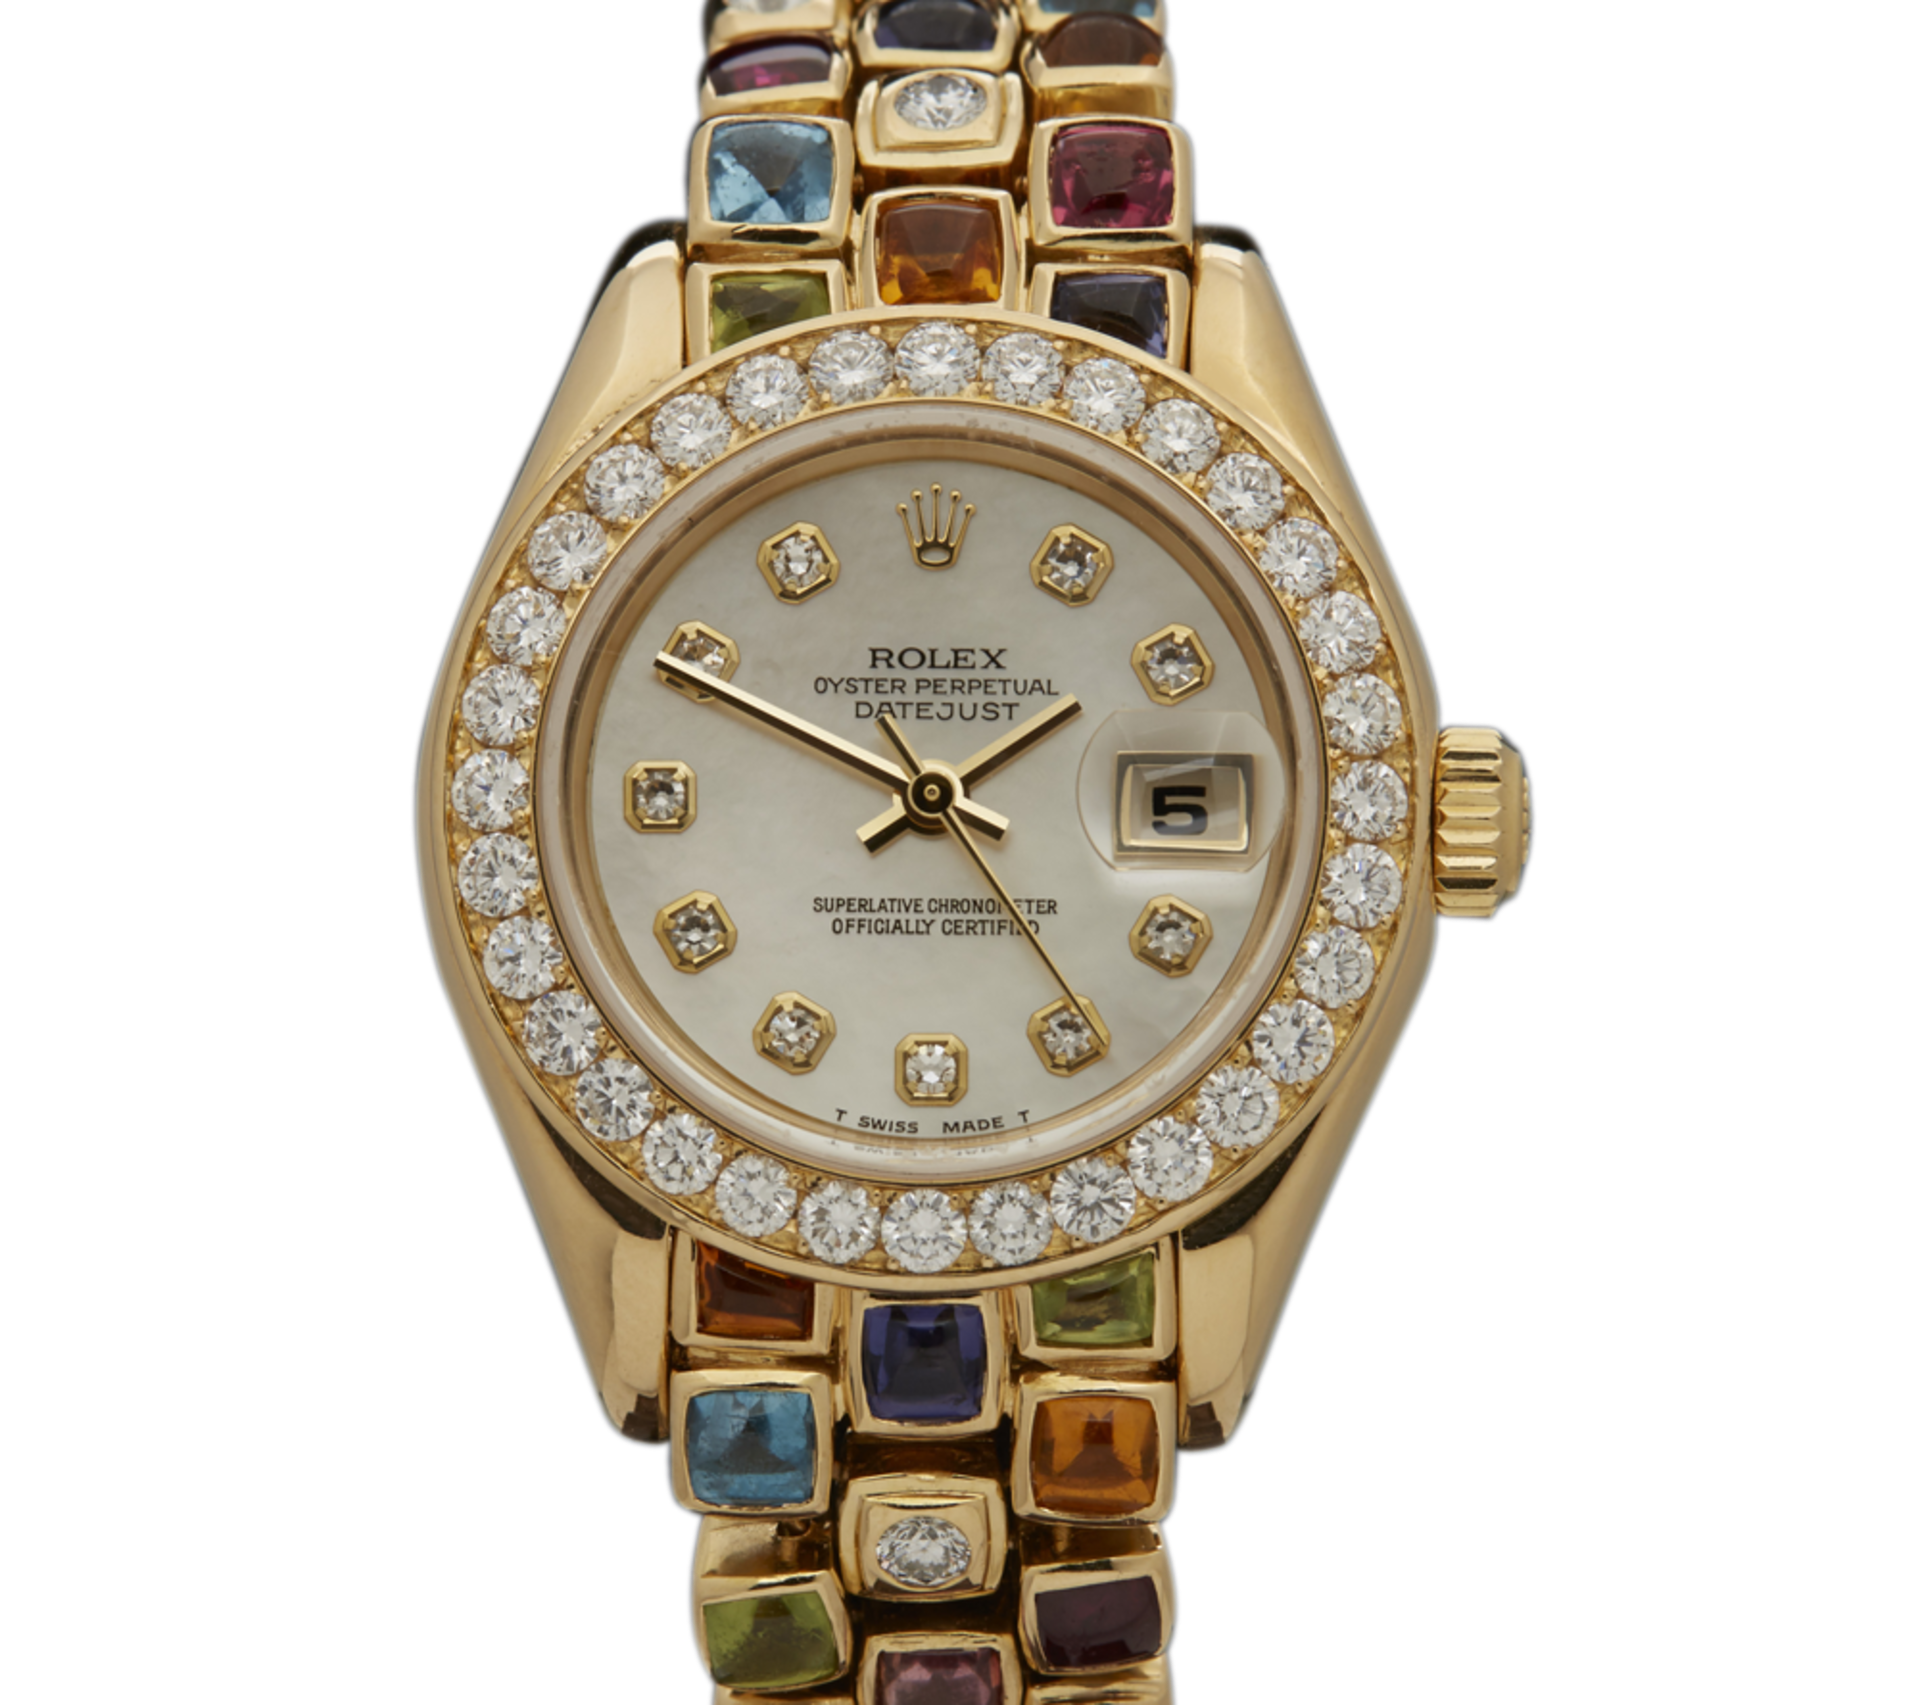 Rolex, Pearlmaster 69298 Diamonds & Precious Gems Limited Edition for the Dubai Royal Family - Image 4 of 11